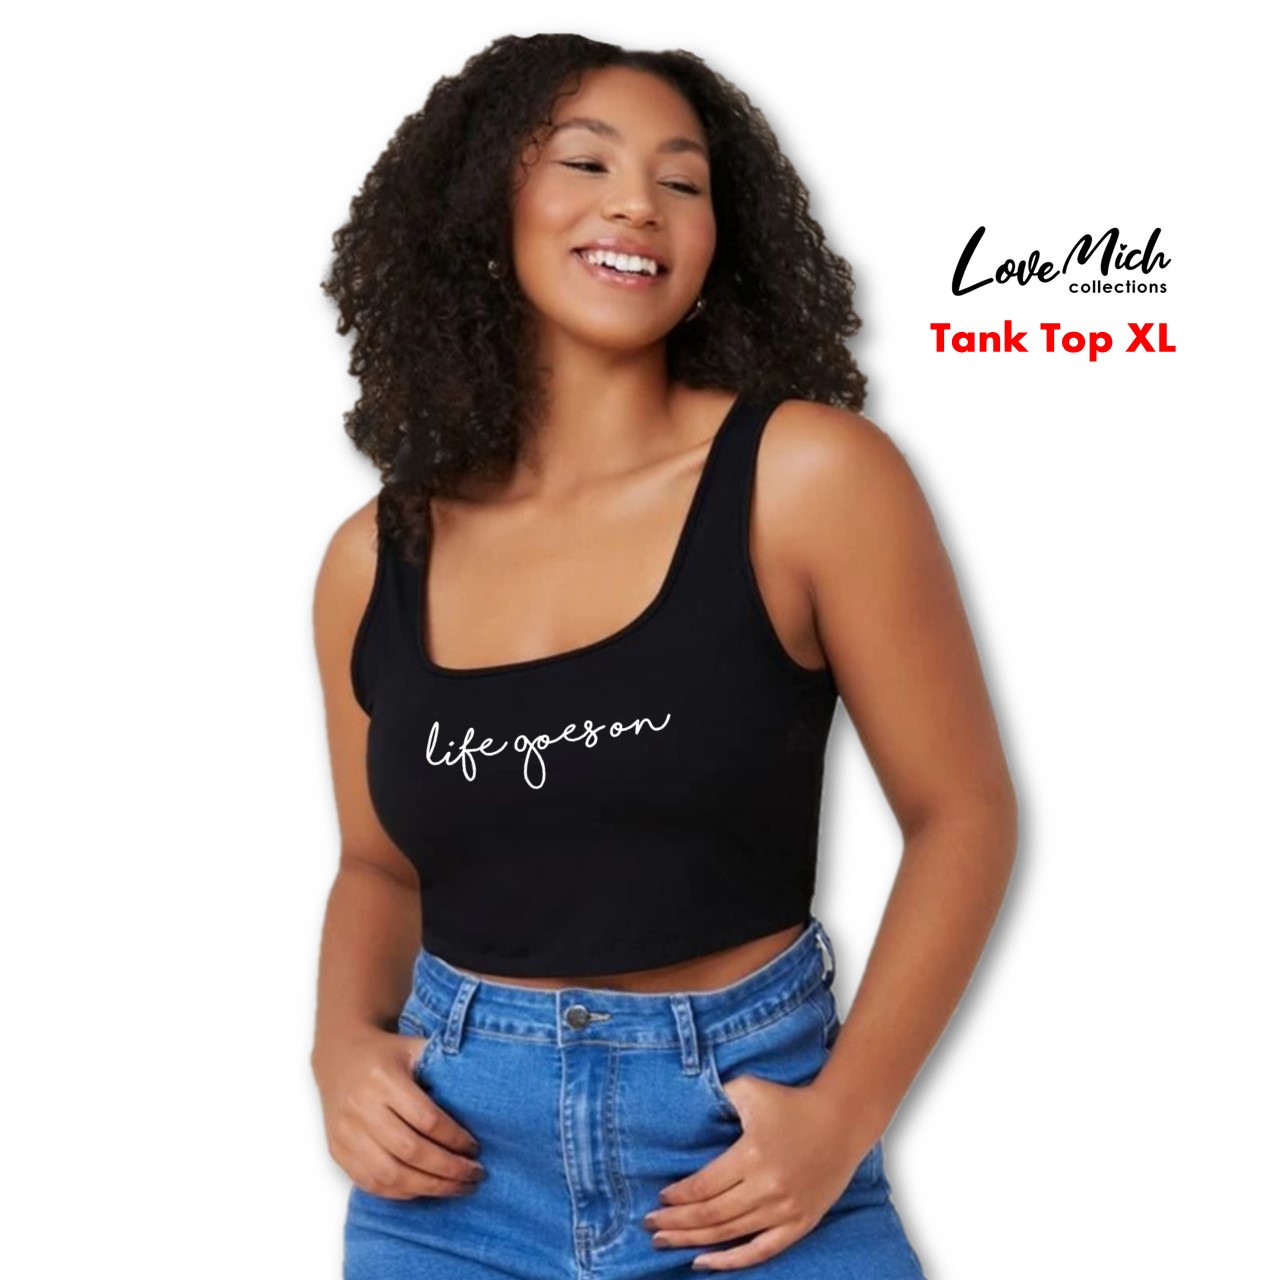 Plus Size Square neck Tank Top Sleeveless Sando tops Women Fashion Clothes  by lovemichcollections